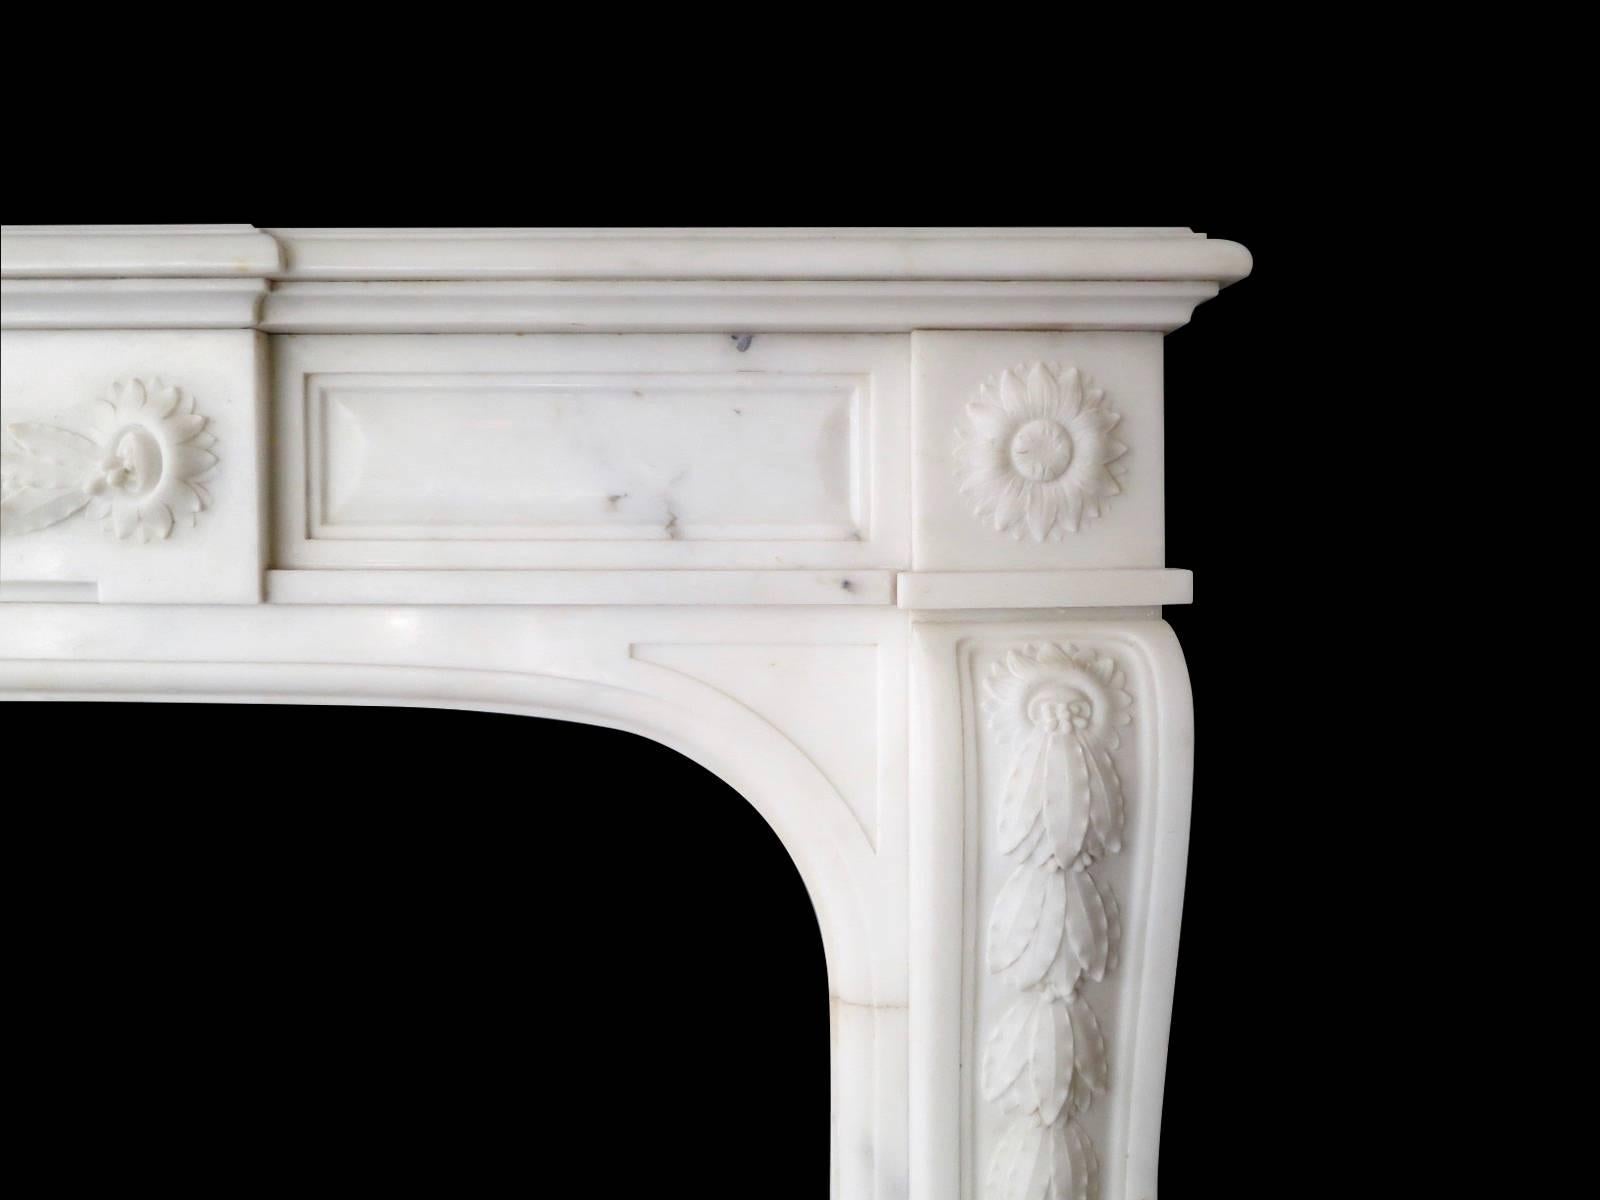 A very good quality 19th century Louis XVI style fireplace in Italian statuary white marble. The console jambs with carved descending laurel leaf surmounted by circular floral carved corner blocks. The centre tablet with conforming carving, flanked